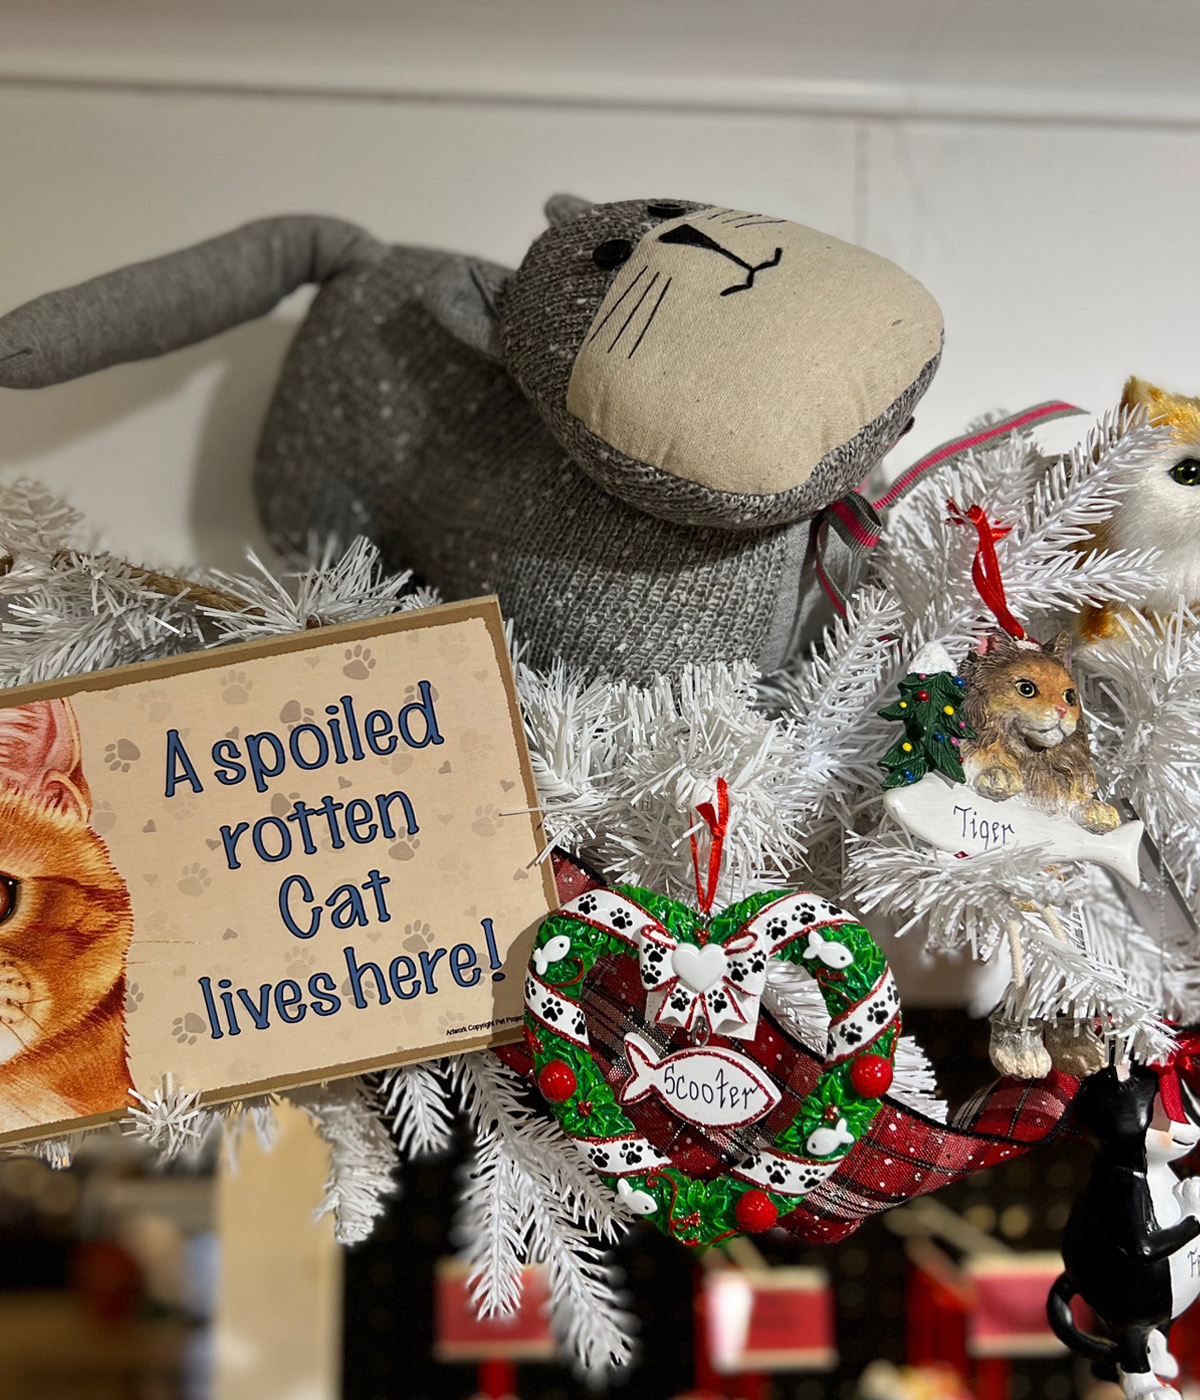 Cat Christmas Ornaments and signage